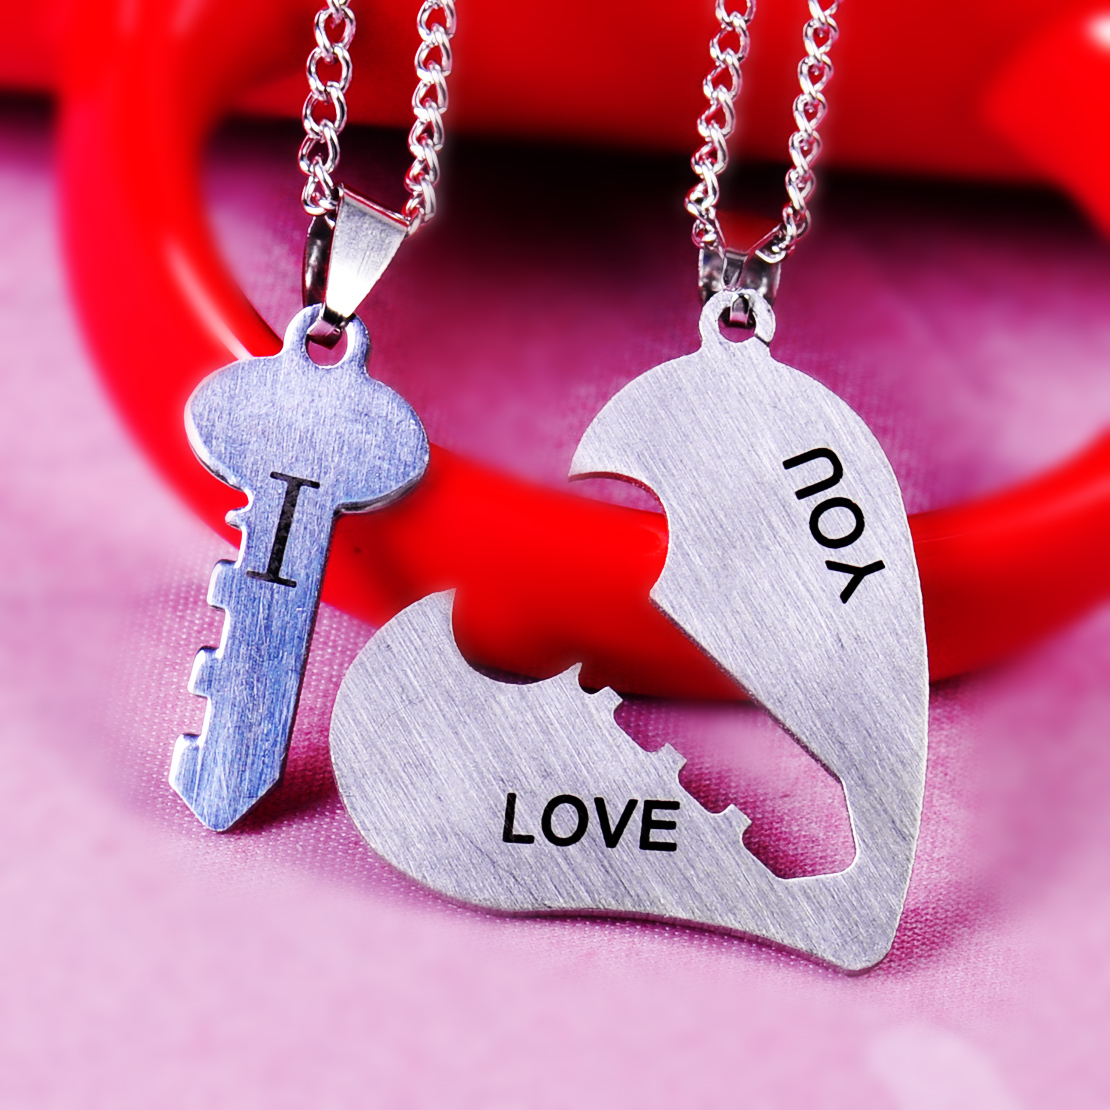 Pair Steel I Love You Heart Lock Key His Hers Lover Couple ...